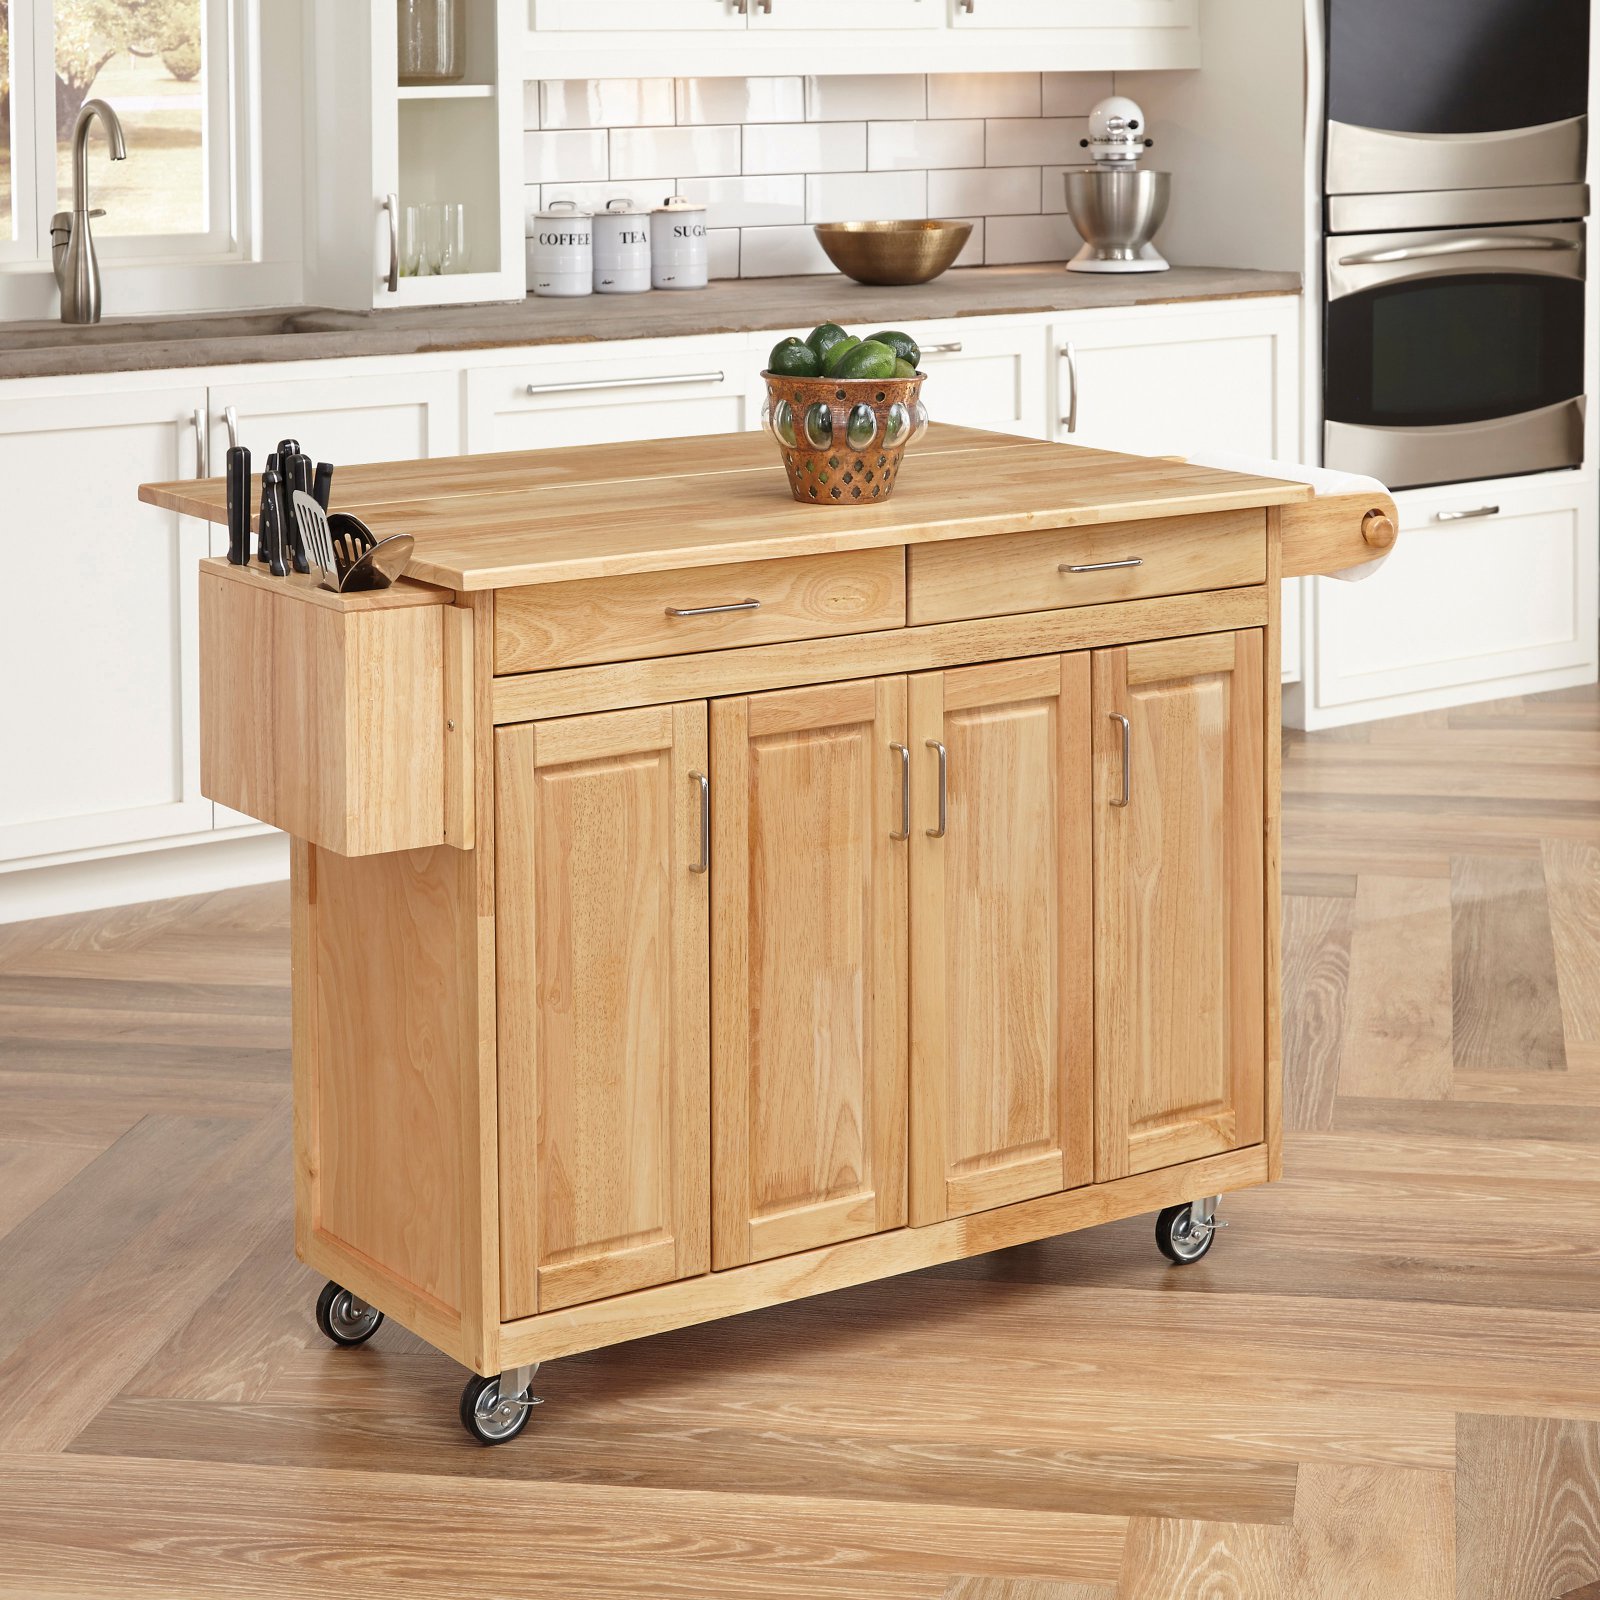 Homestyles General Line Wood Rolling Kitchen Cart in Brown - image 2 of 5